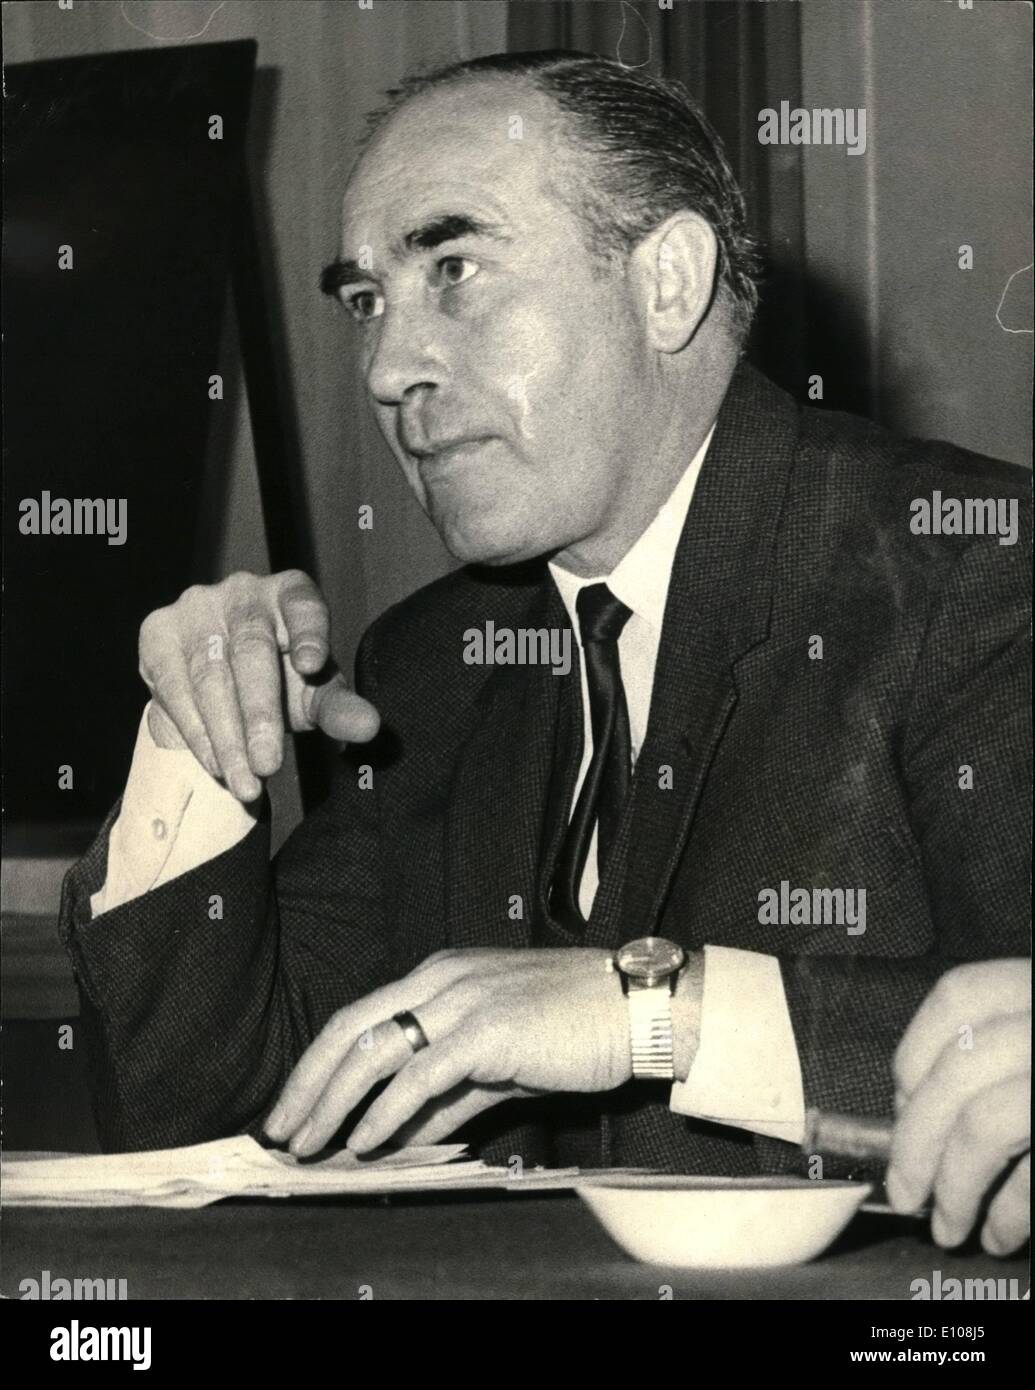 Mar. 03, 1970 - Sir Alf Ramsey announces world cup squad.: Sir Alf Ramsey today announced his world cup squad, at a meeting organised by the Sports Writers' Association - at the Great Western hotel, Paddington. Photo shows Sir Alf Ramsey announces his world cup squad - at today's meeting. Stock Photo